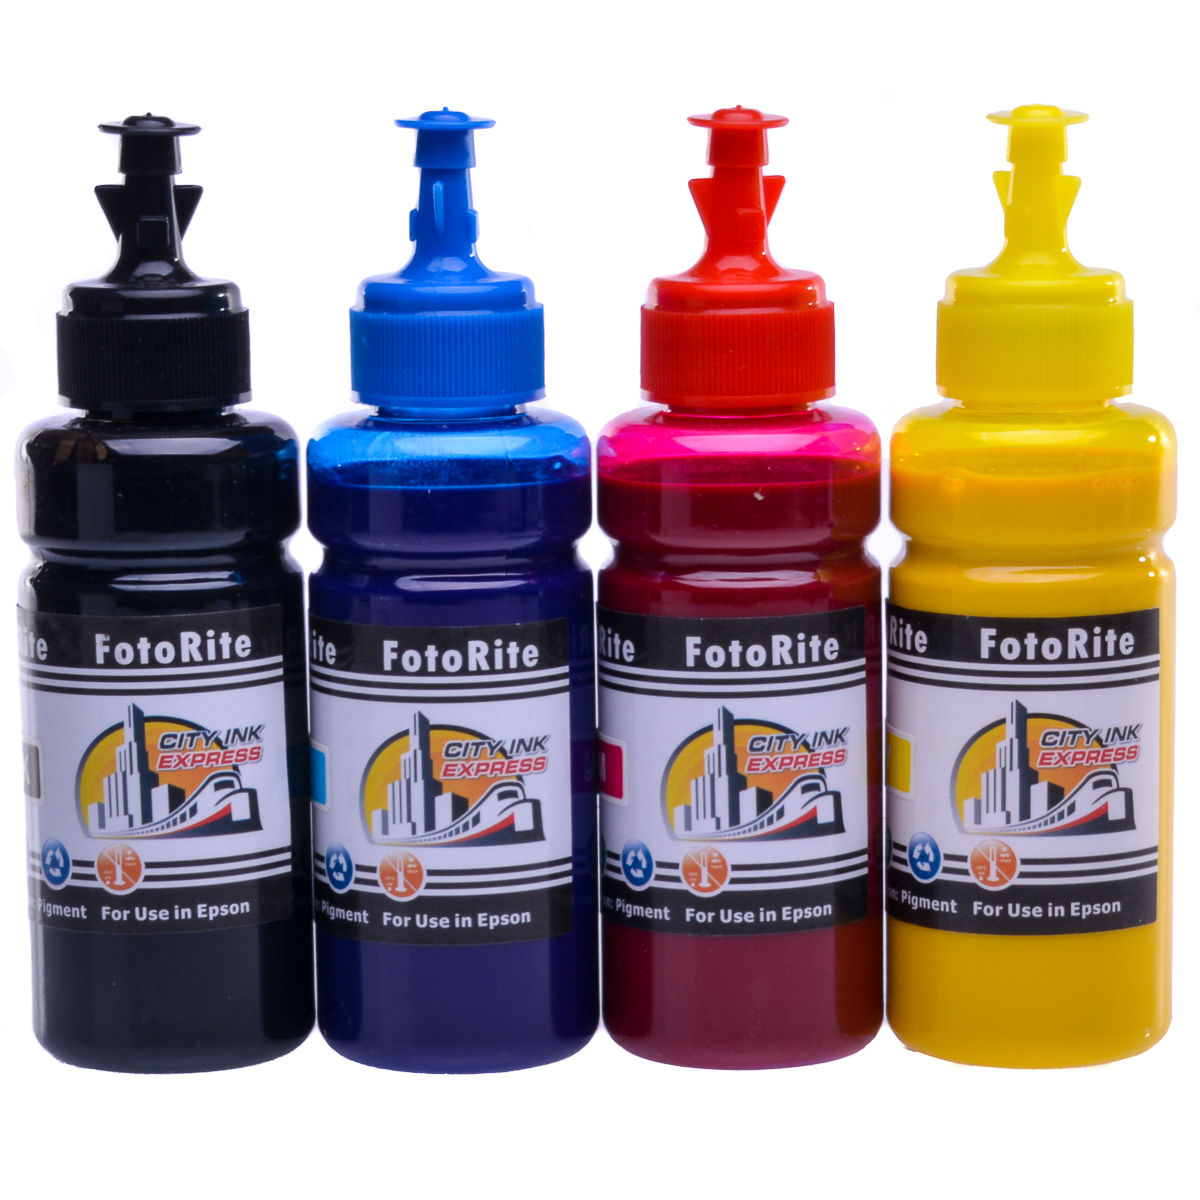 Cheap Multipack pigment ink refill replaces Epson ET-5880